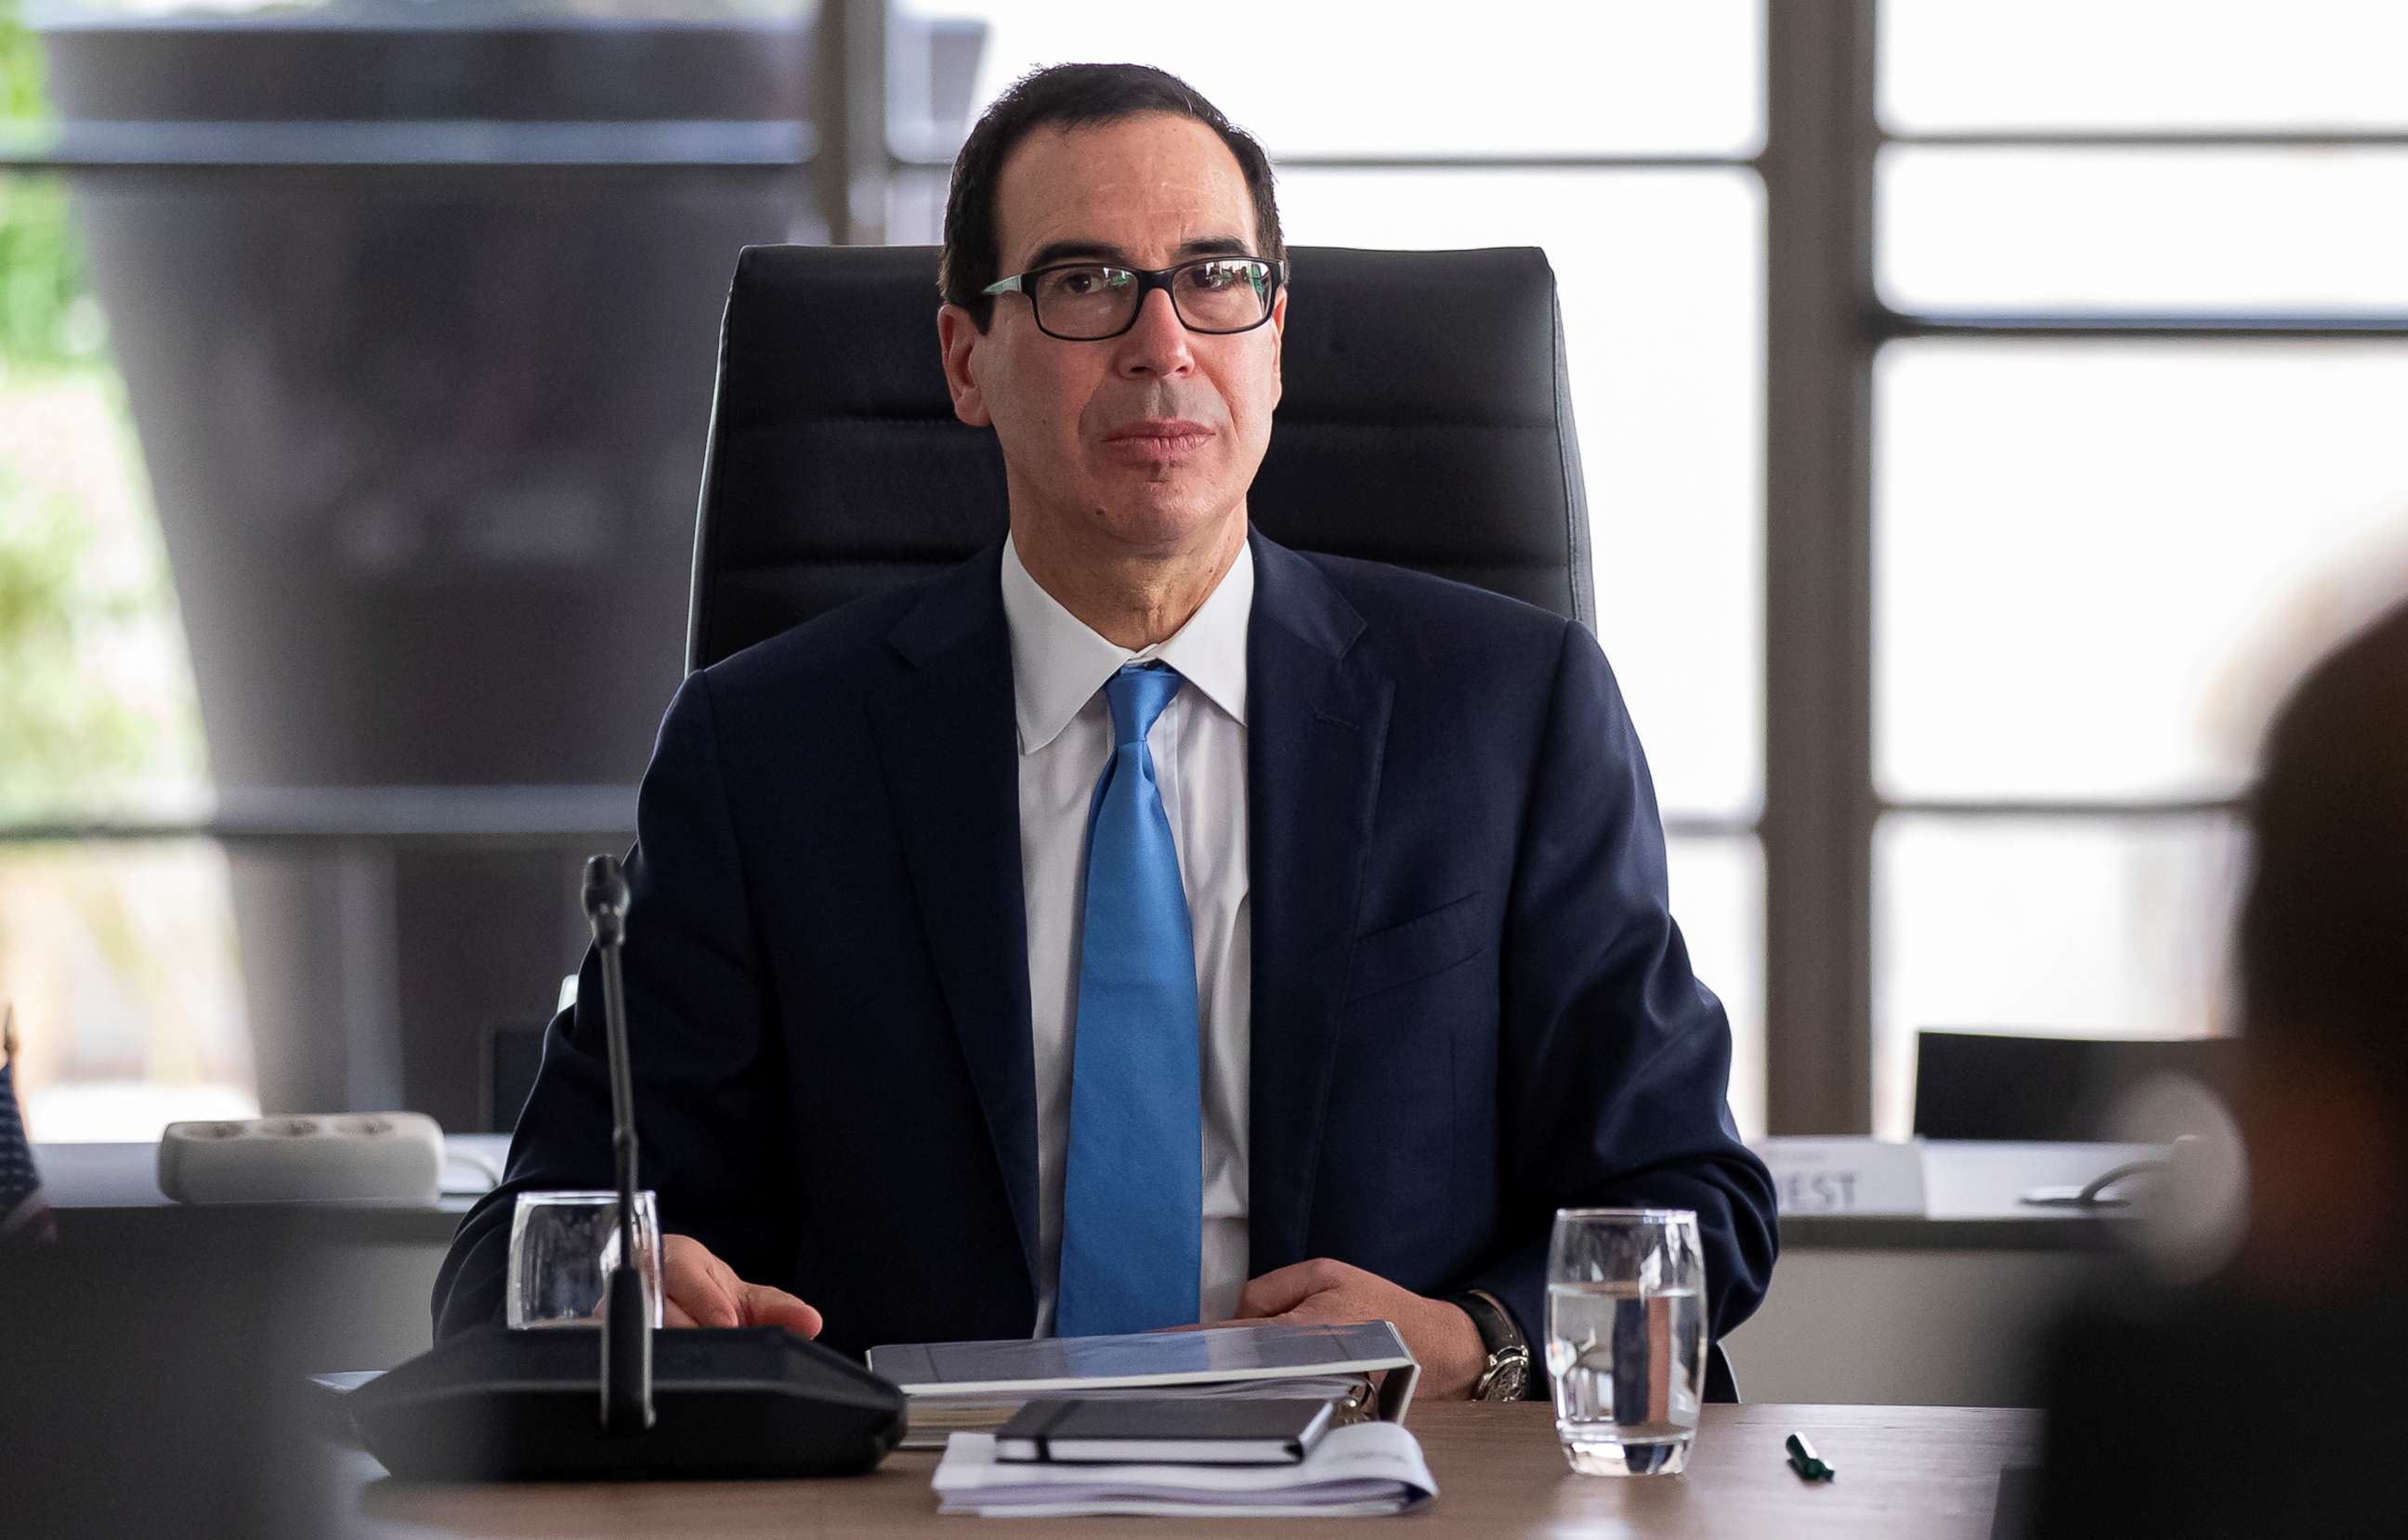 PHOTO: Treasury Secretary Steven Mnuchin attends a working session during the G7 finance ministers and central bank governors meeting in Chantilly, near Paris, France, July 17, 2019.